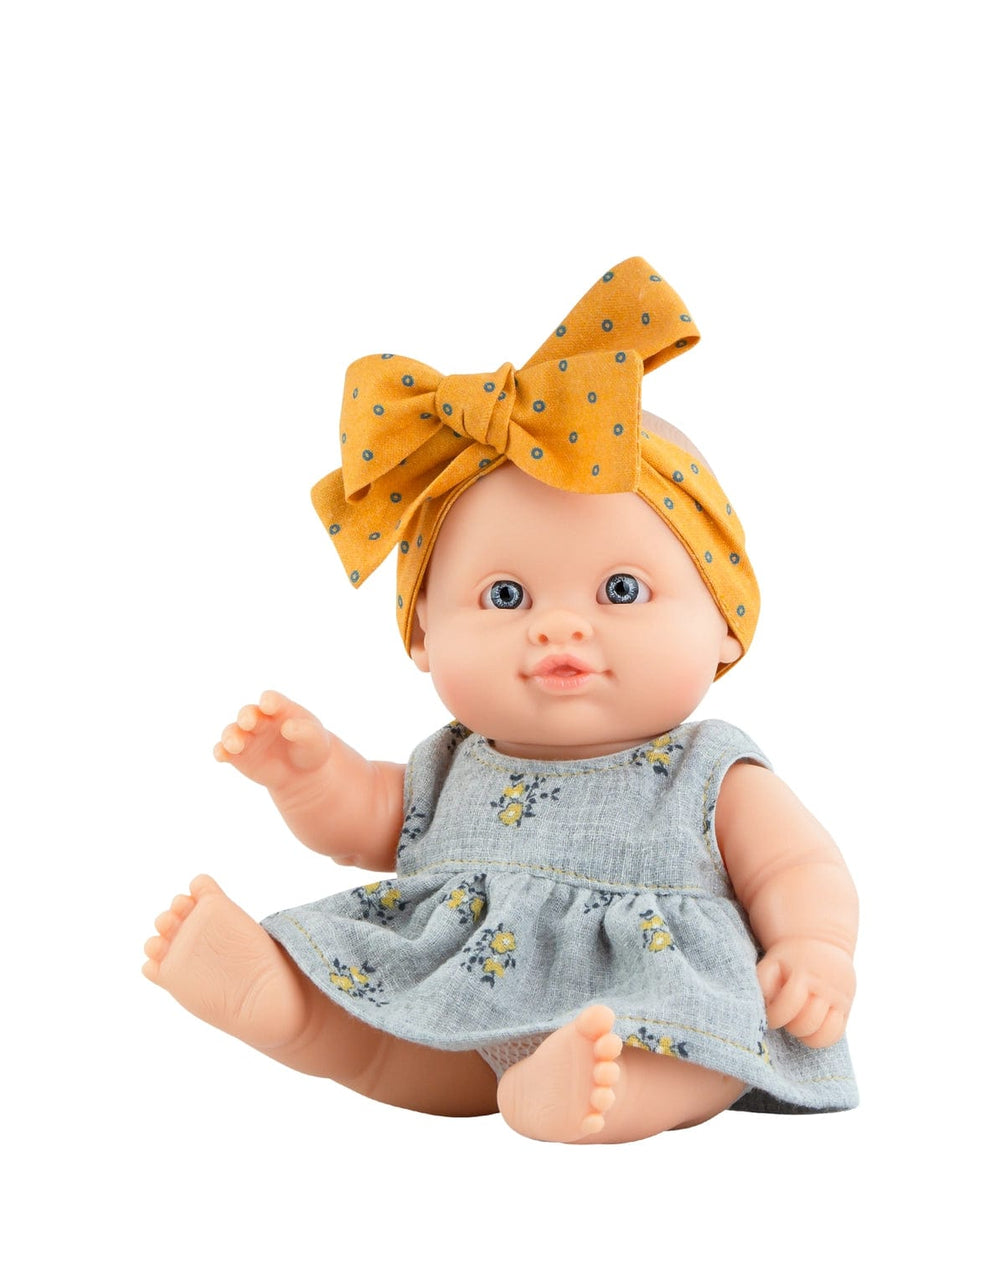 Irina with Floral Gray Dress and Mustard Polka Dot Bow Headband - Peques Doll Paola Reina Dolls Lil Tulips